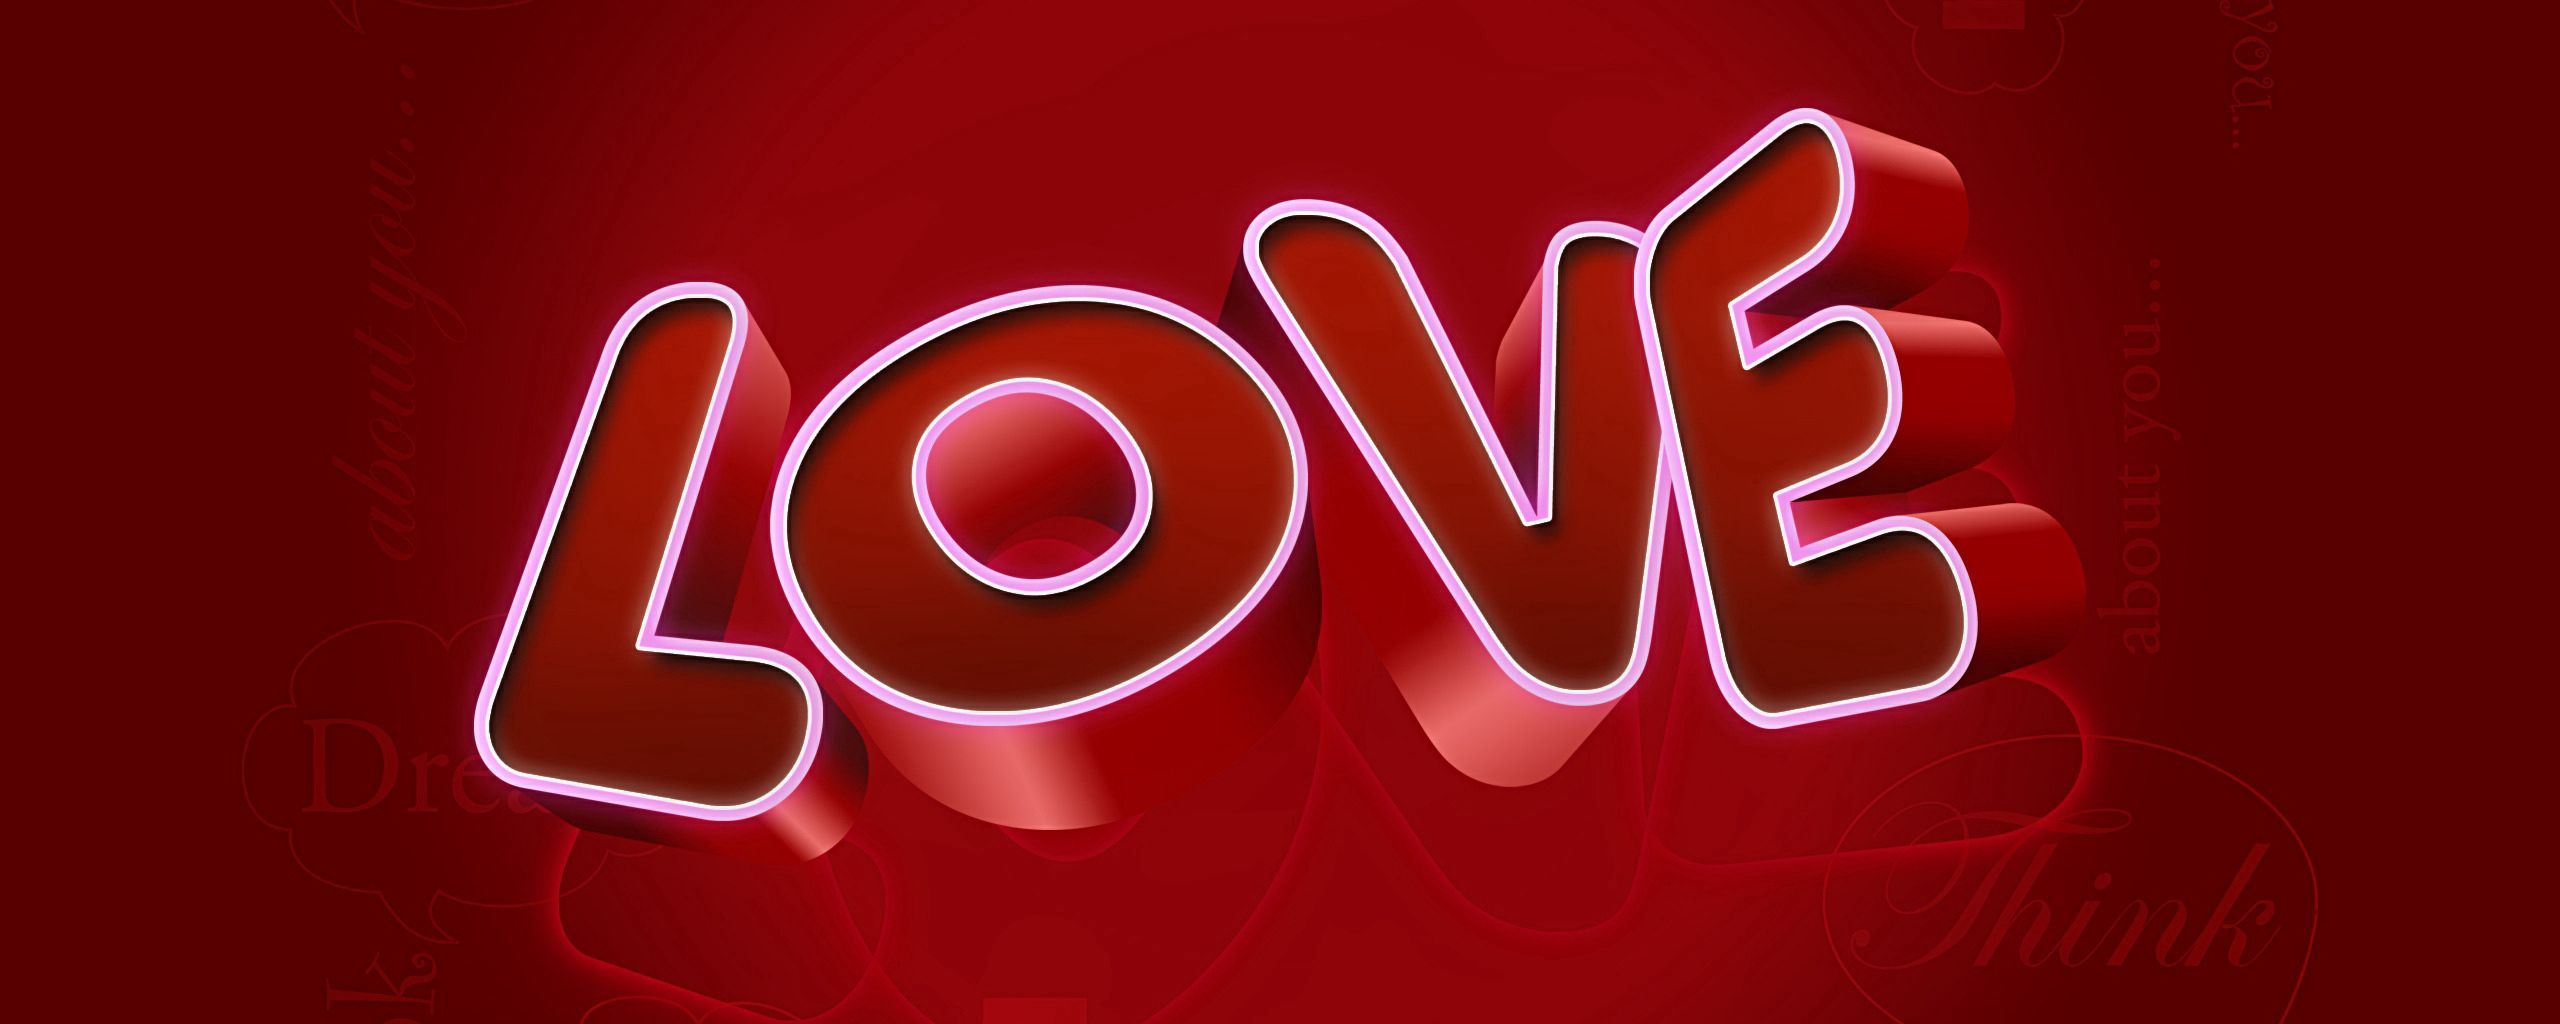 Download wallpaper 2560x1024 love, sign, red, white ultrawide monitor HD background